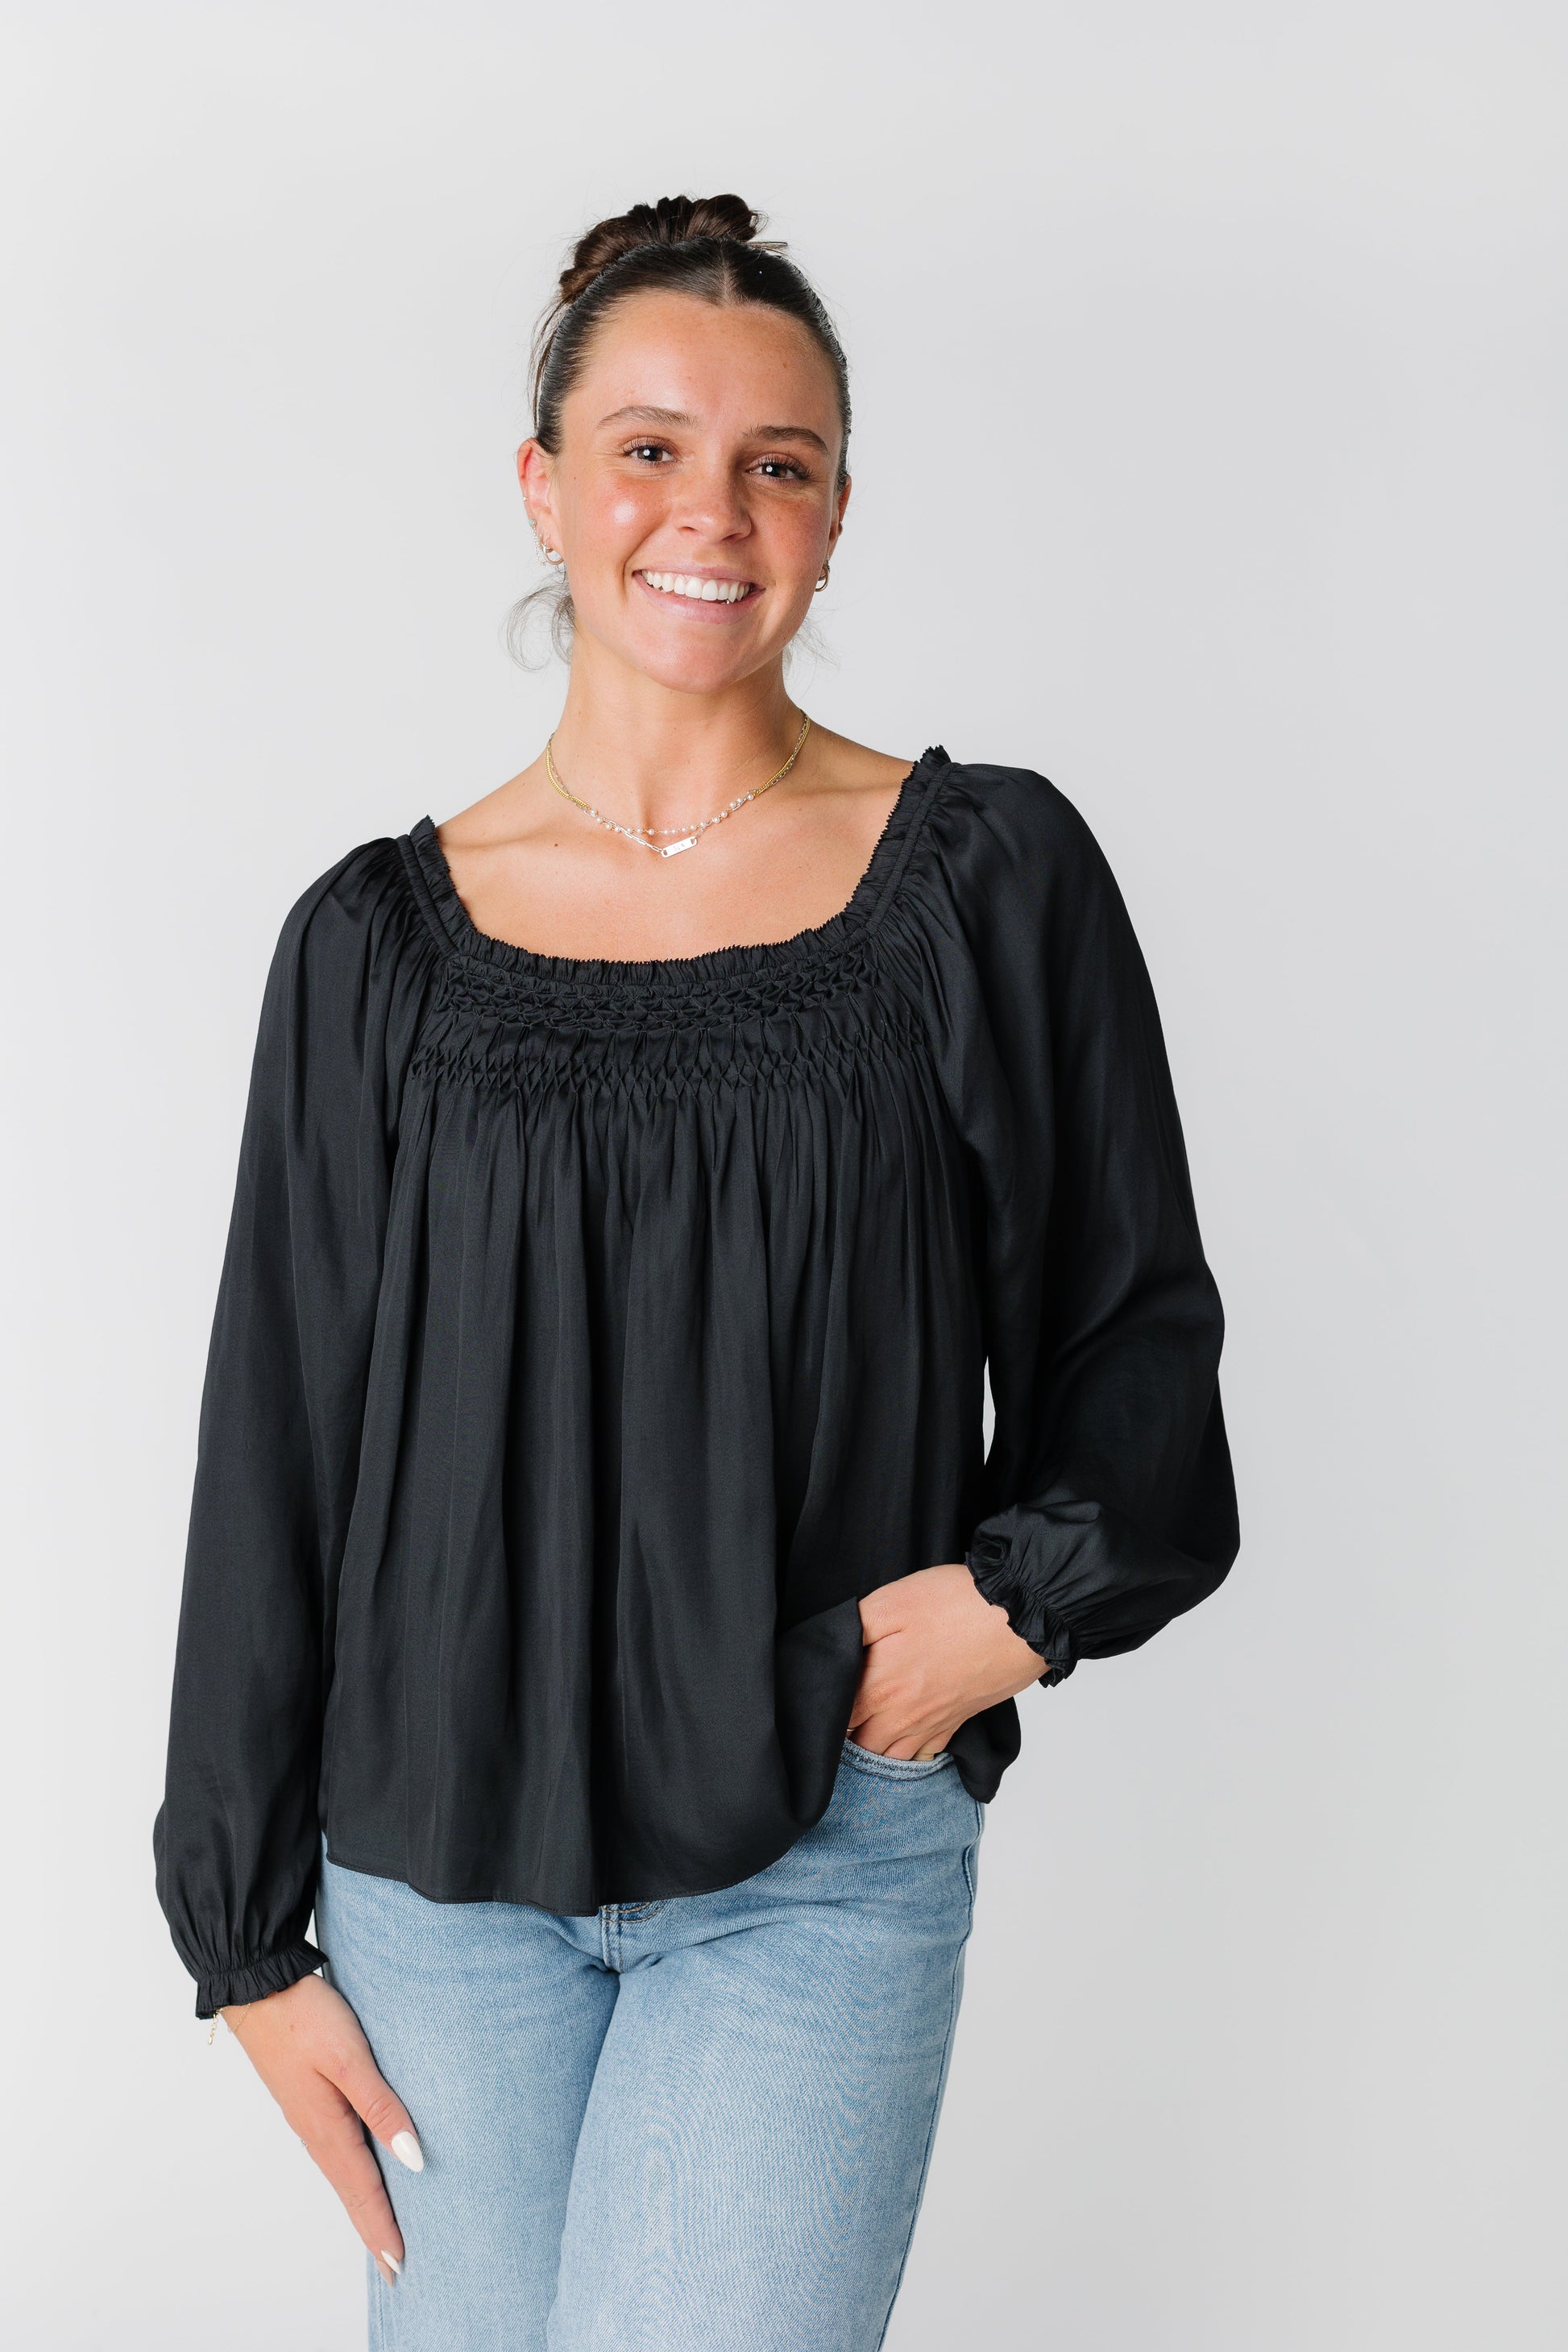 Our Day Smocked Satin Top WOMEN'S TOP Grade & Gather Black L 